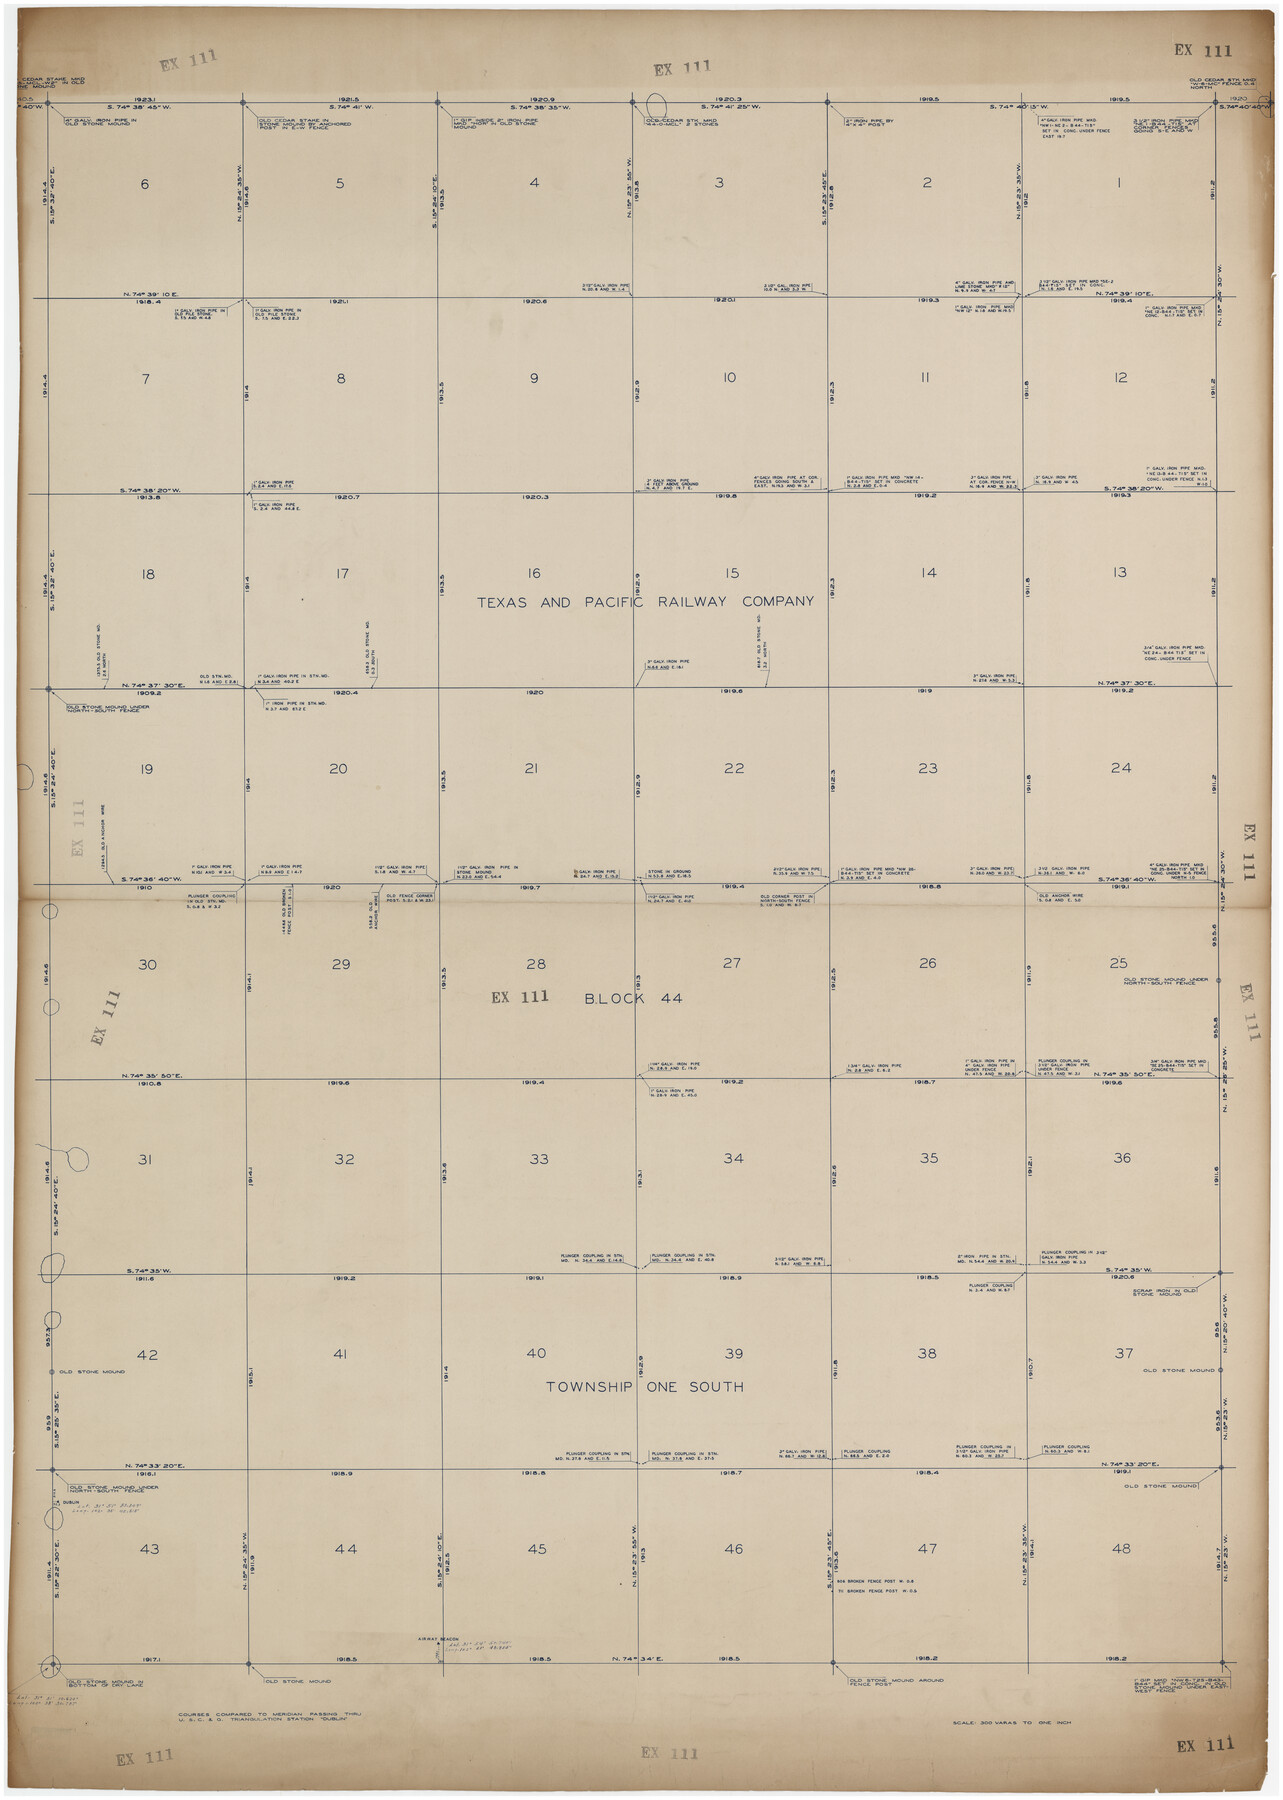 89845, [Texas and Pacific Railway Company, Block 44, Township One South], Twichell Survey Records